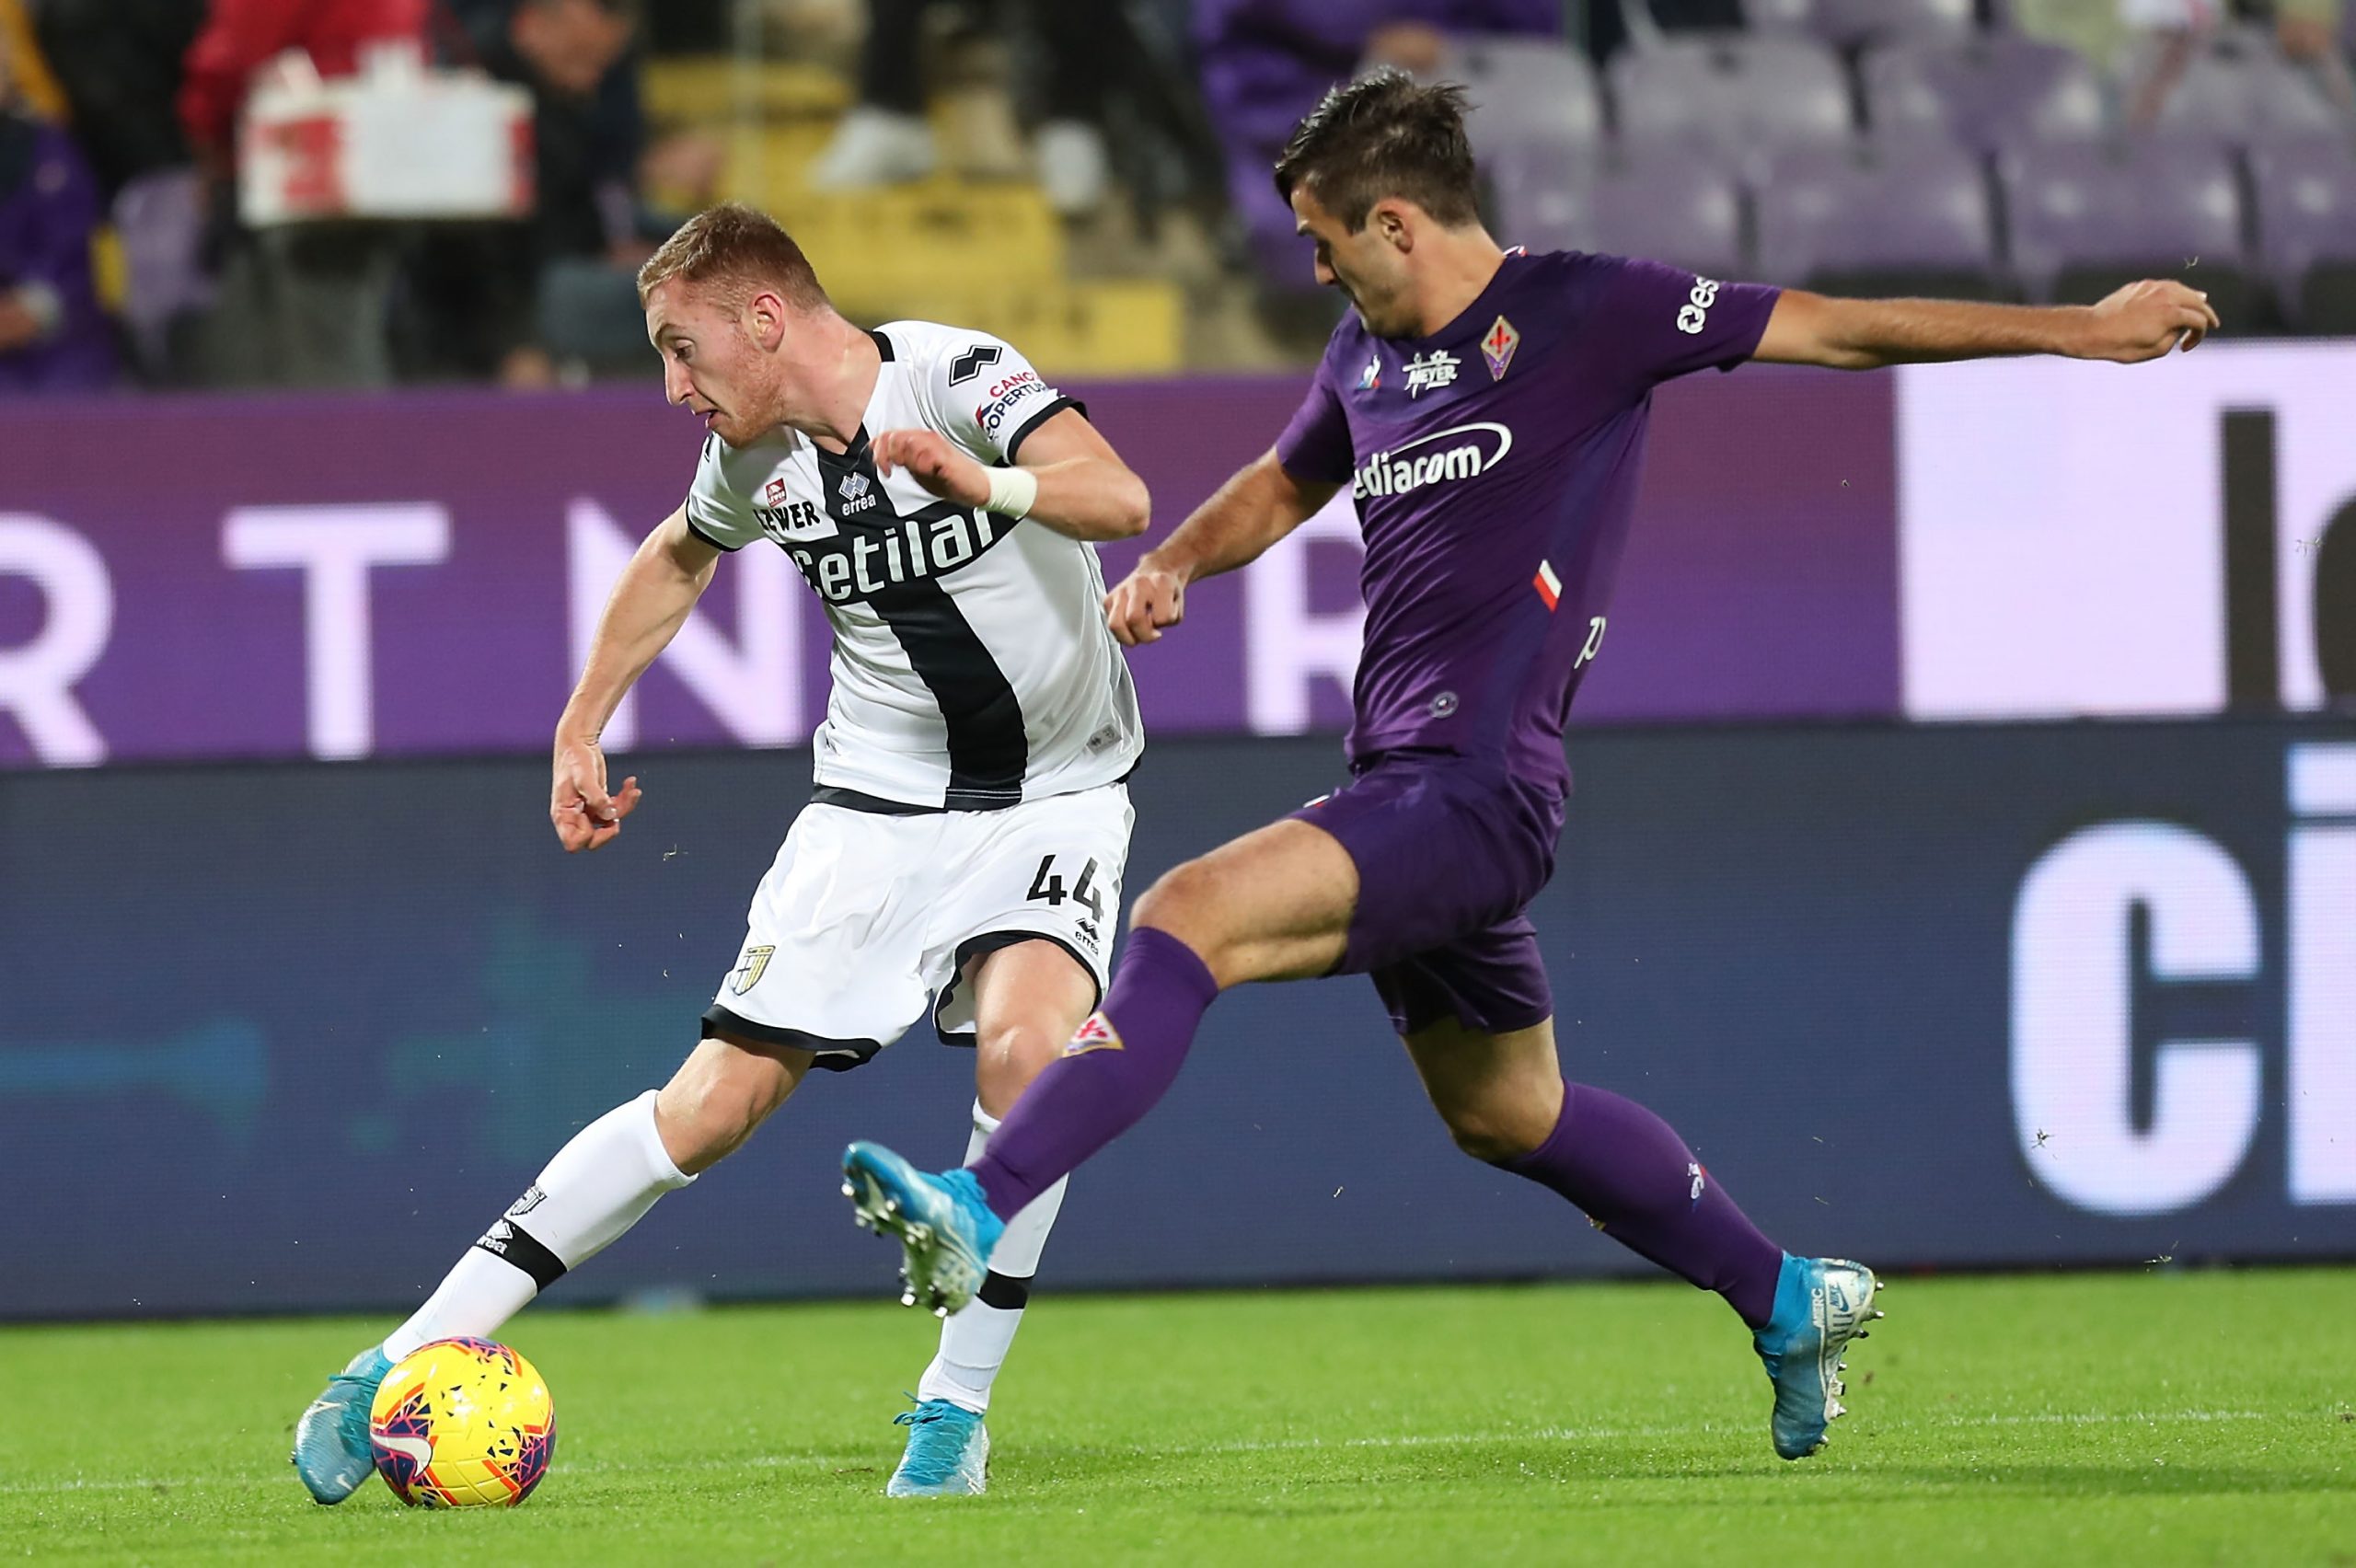 FLORENCE, ITALY - NOVEMBER 03: Luca Ranieri of ACF Fiorentina battles for the ball with Dejan Kulusevski of Parma Calcio during the Serie A match between ACF Fiorentina and Parma Calcio at Stadio Artemio Franchi on November 3, 2019 in Florence, Italy.  (Photo by Gabriele Maltinti/Getty Images)